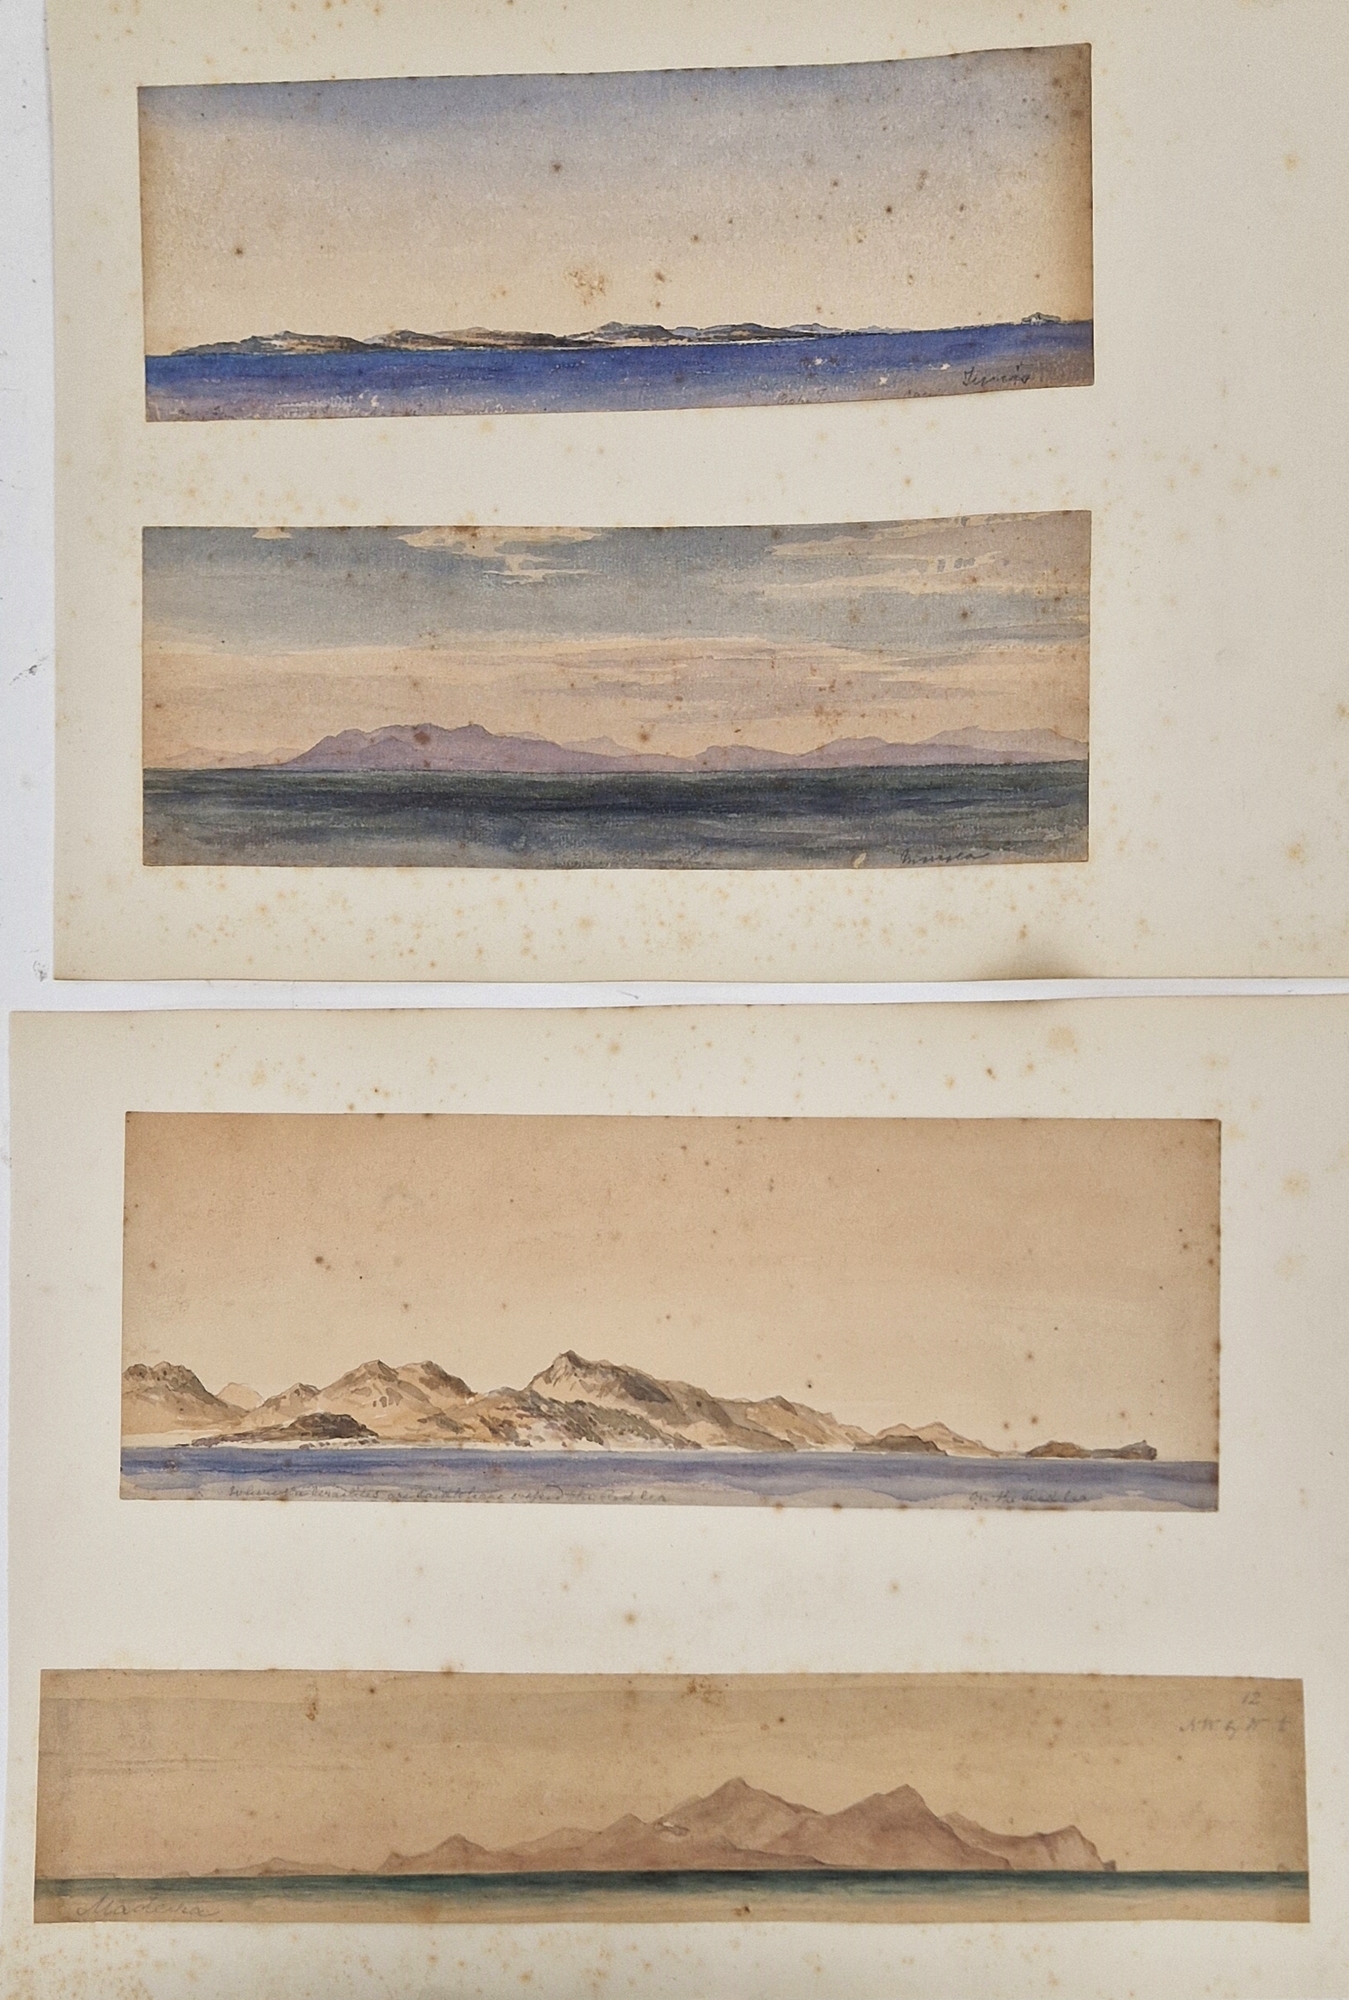 Watercolour drawings - collection Attrib. A H. Walter " A Passage from India to England 1873" - Image 12 of 13